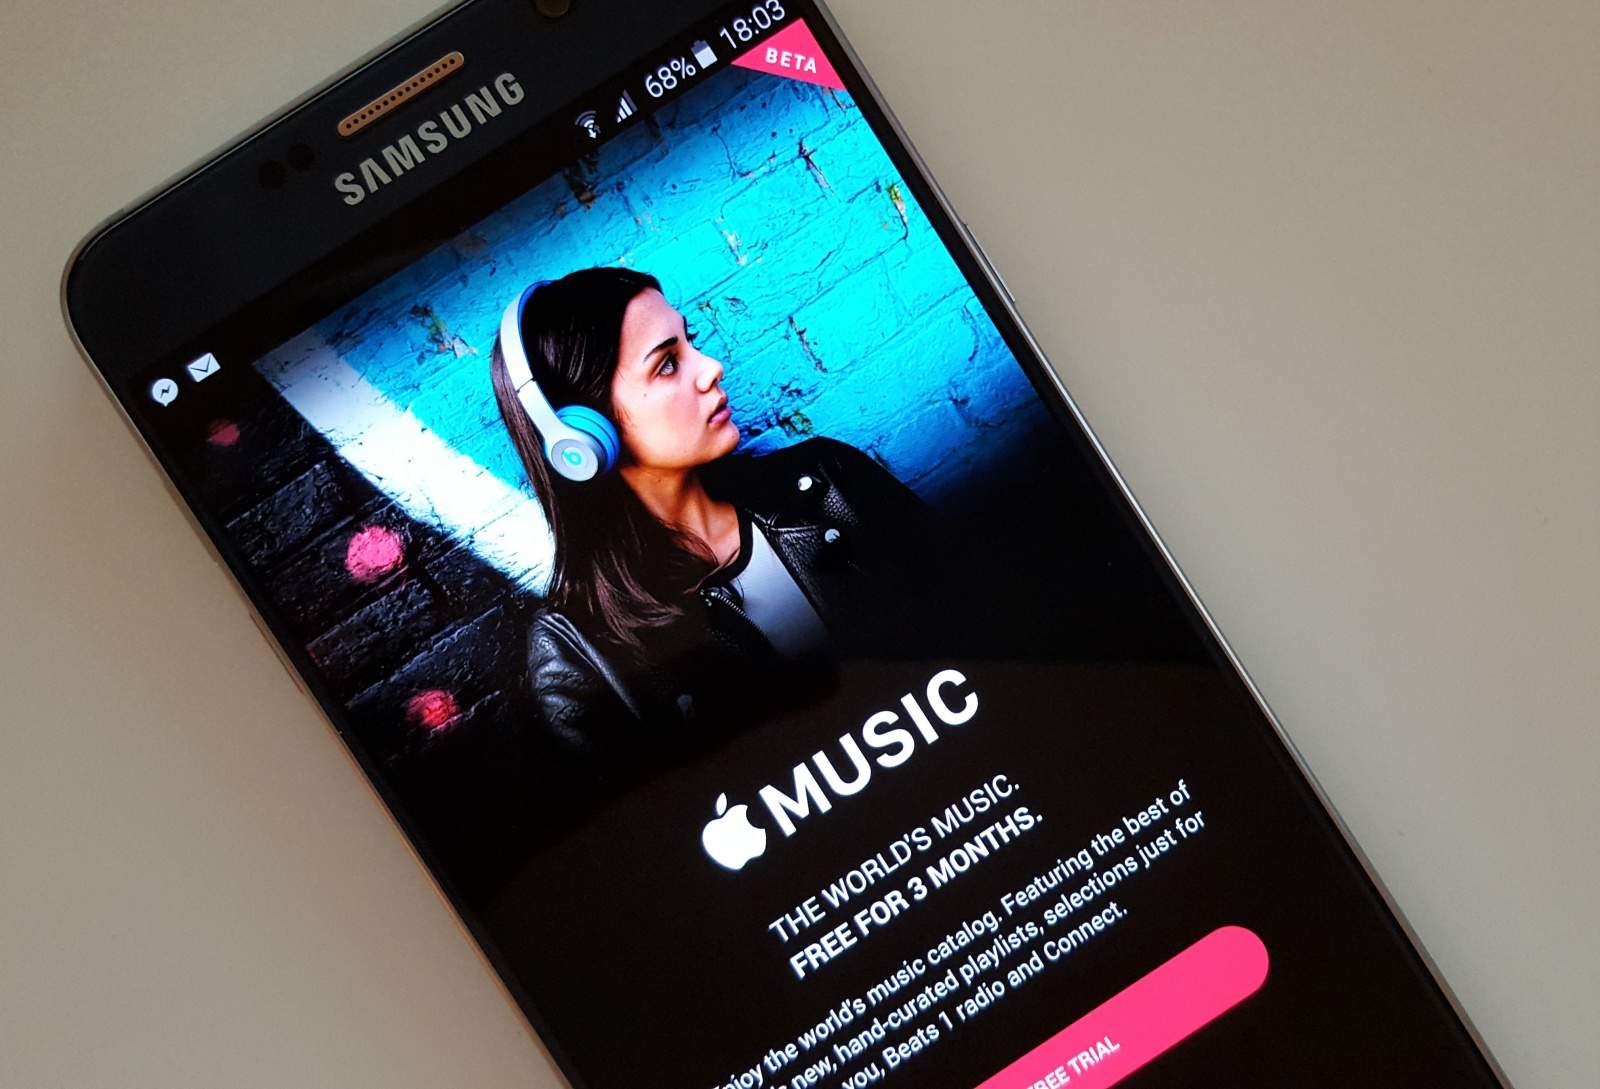 apple-music-on-android-gains-support-for-music-videos-and-family-membership-image-cultofandroidcomwp-contentuploads201511Apple-Music-Android.jpg